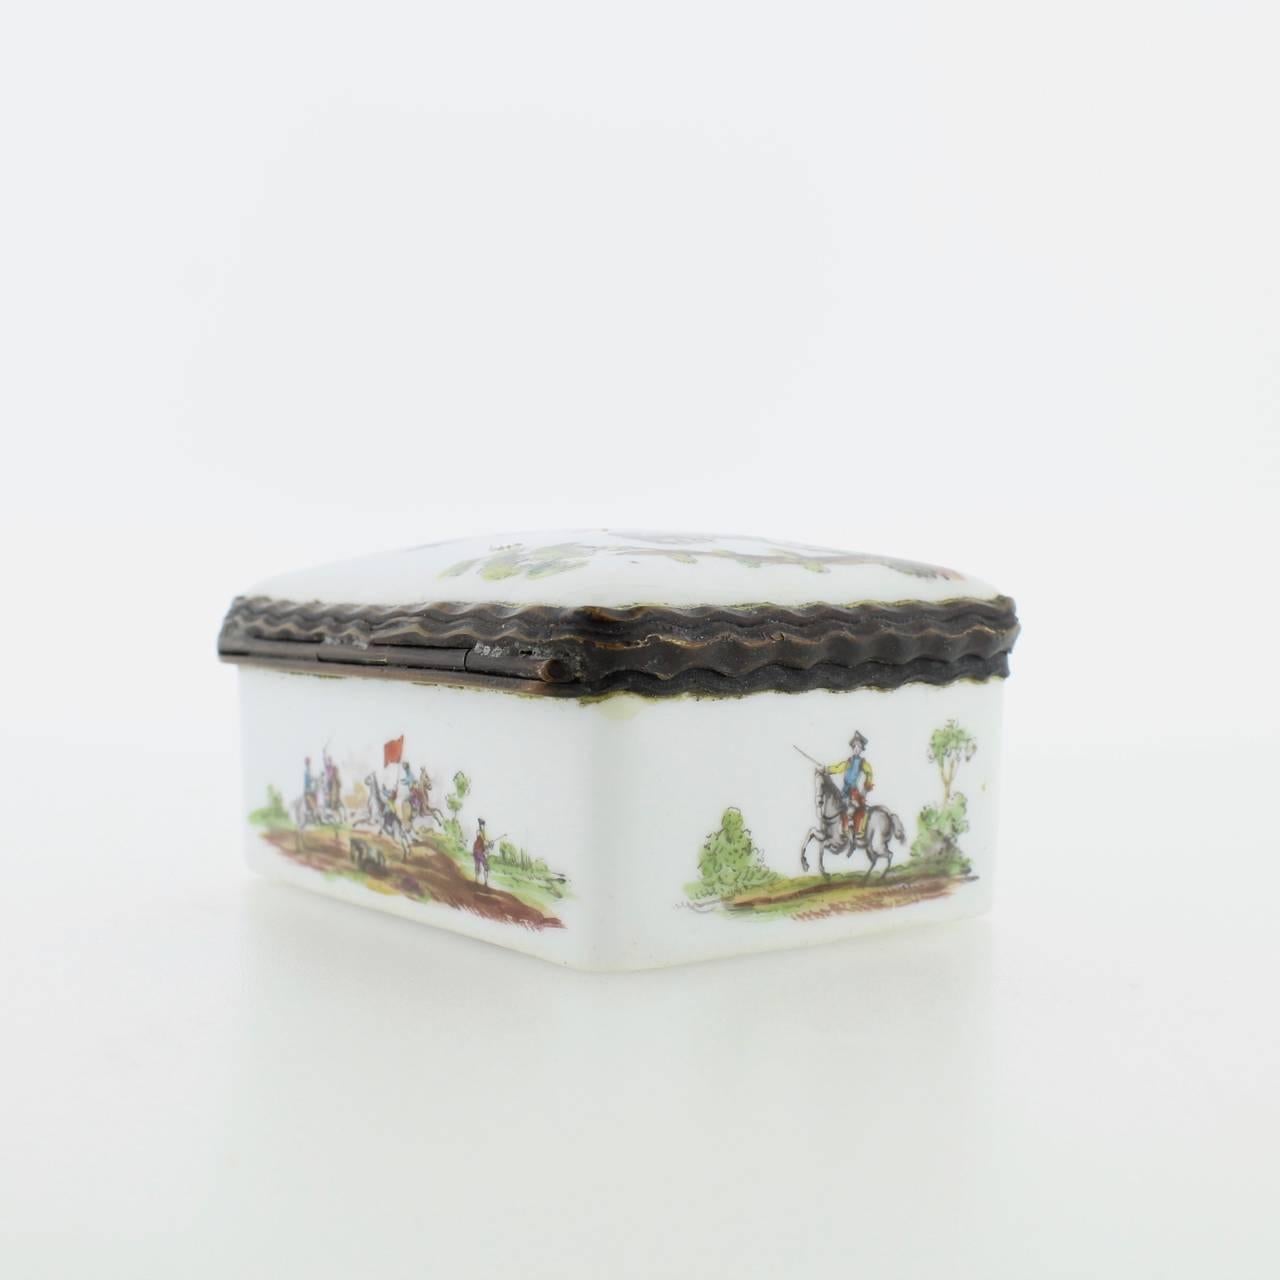 Antique French or German Porcelain Snuff Box with Hand-Painted Military Scenes For Sale 3